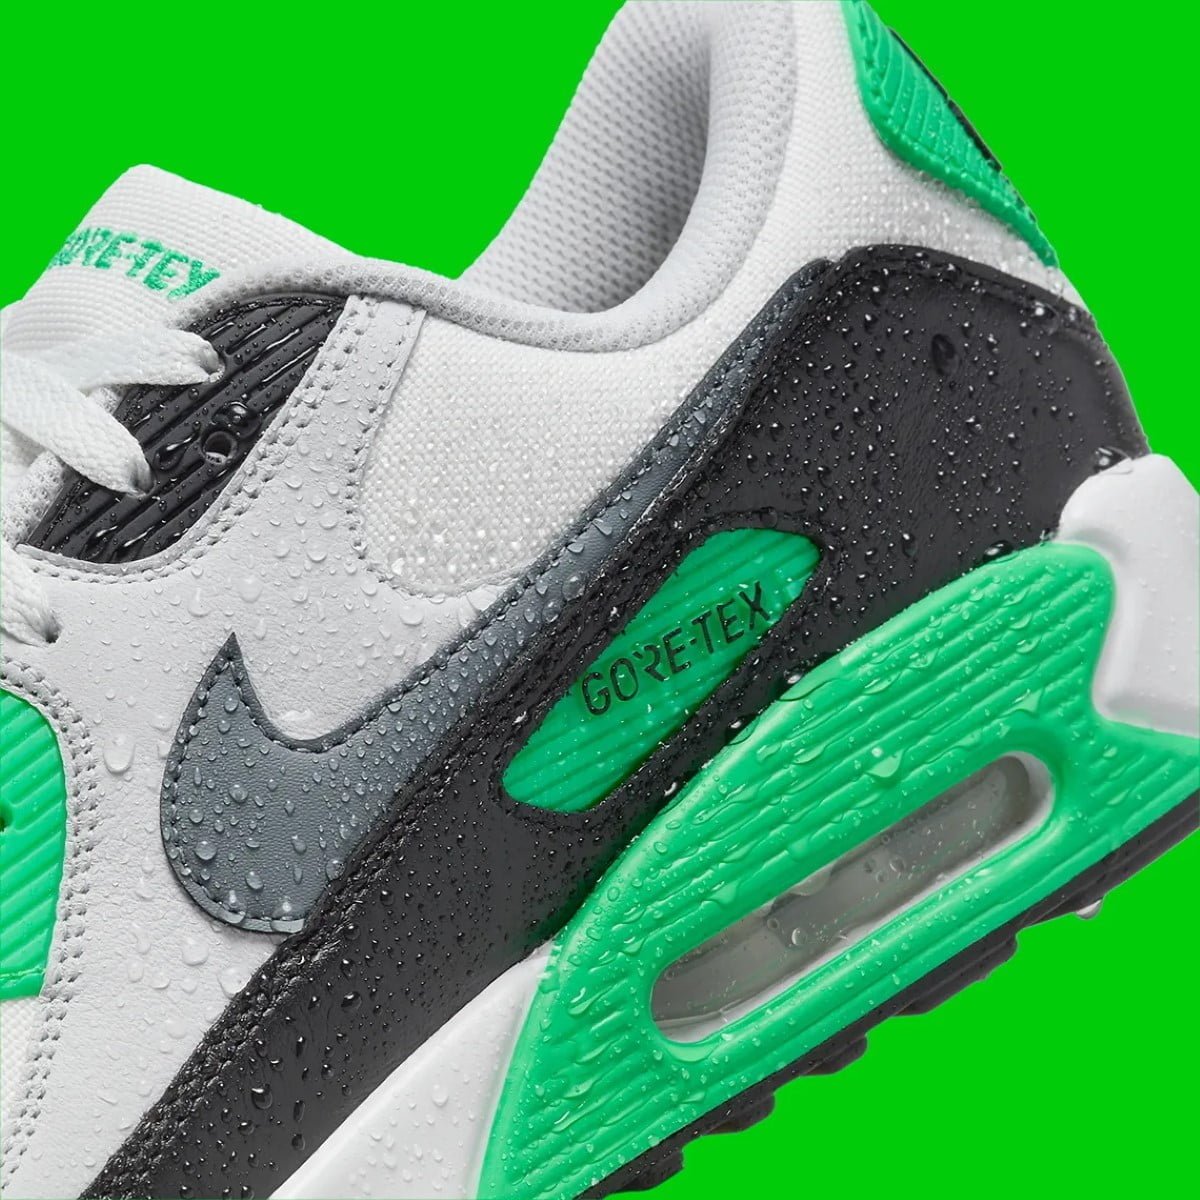 Nike Air Max 90 Expands GORE-TEX Collection with New "Scream Green" Colorway